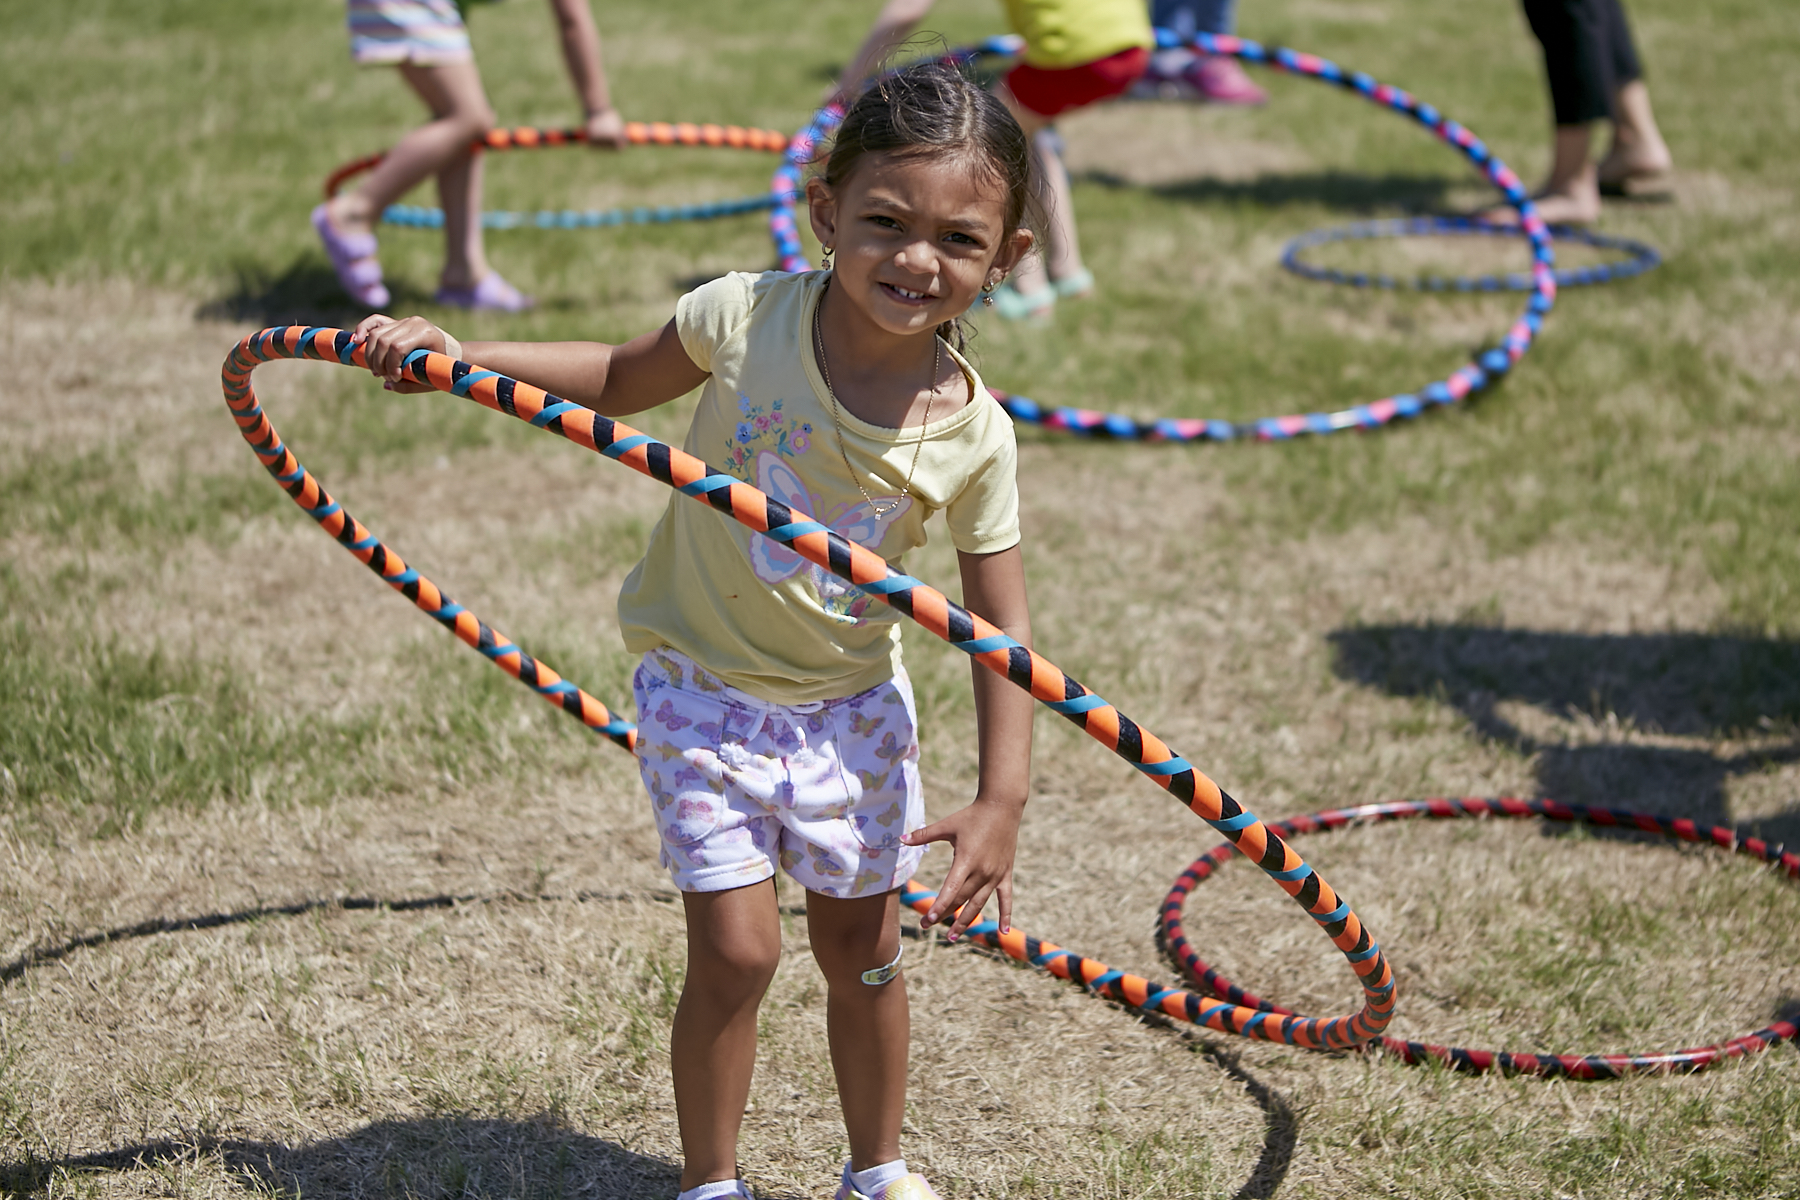 Photo of small girl with a ponytail and earrings, holding a large hula hoop